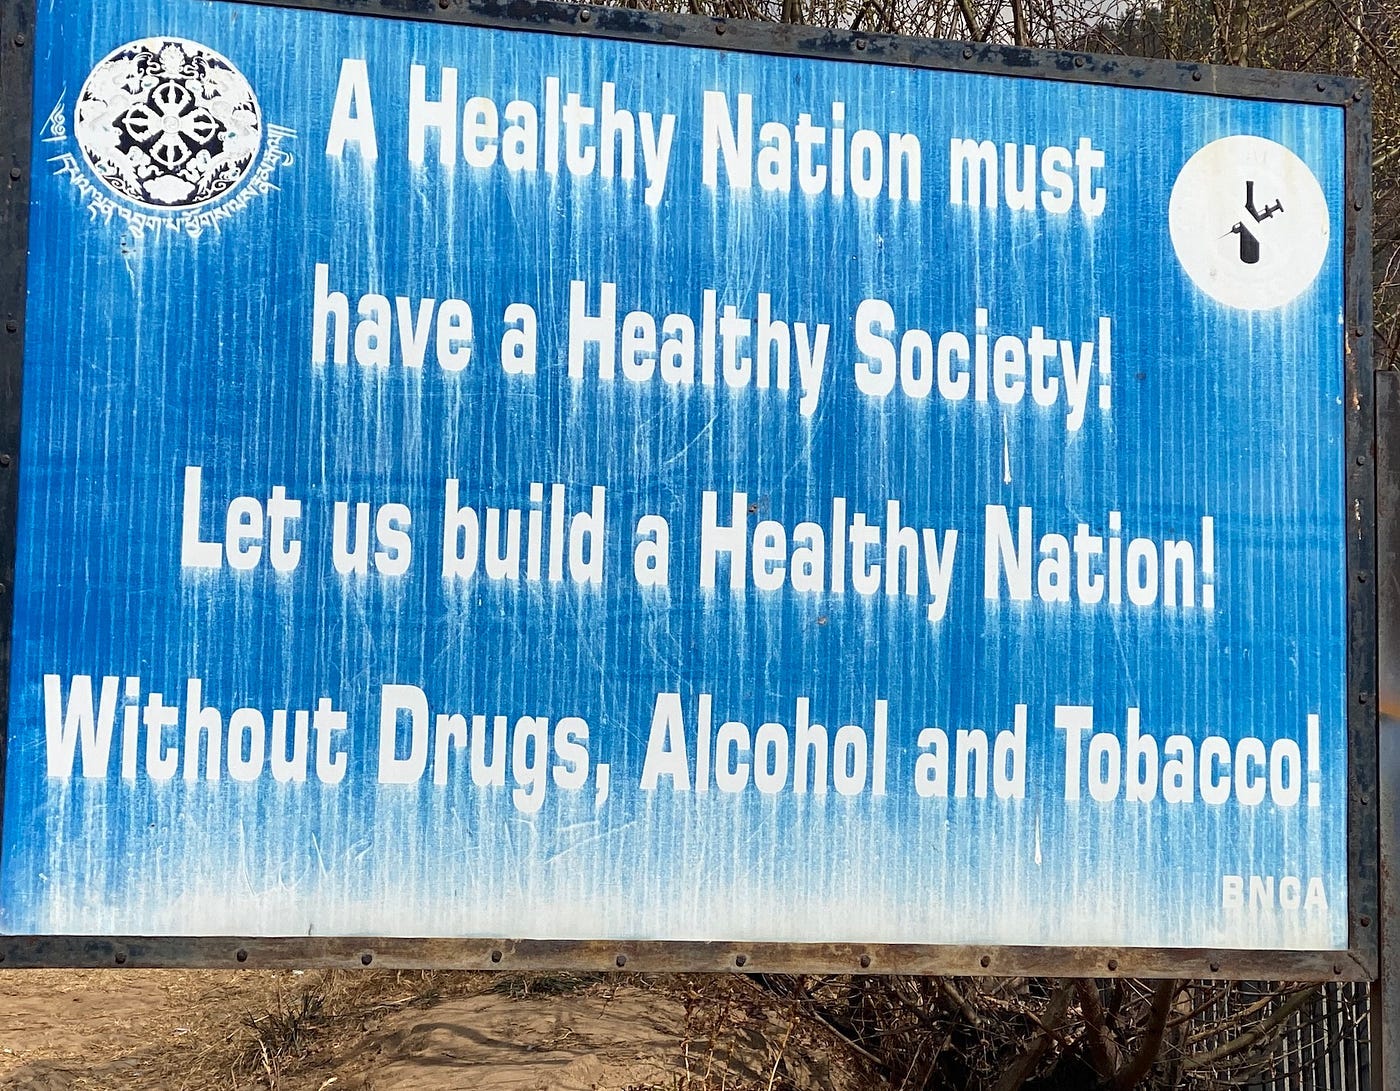 A roadside billboard. The text reads “A healthy nation must have a Healthy society! Let us build a Healthy Nation! Without Drugs, Alcohol and Tobacco!”